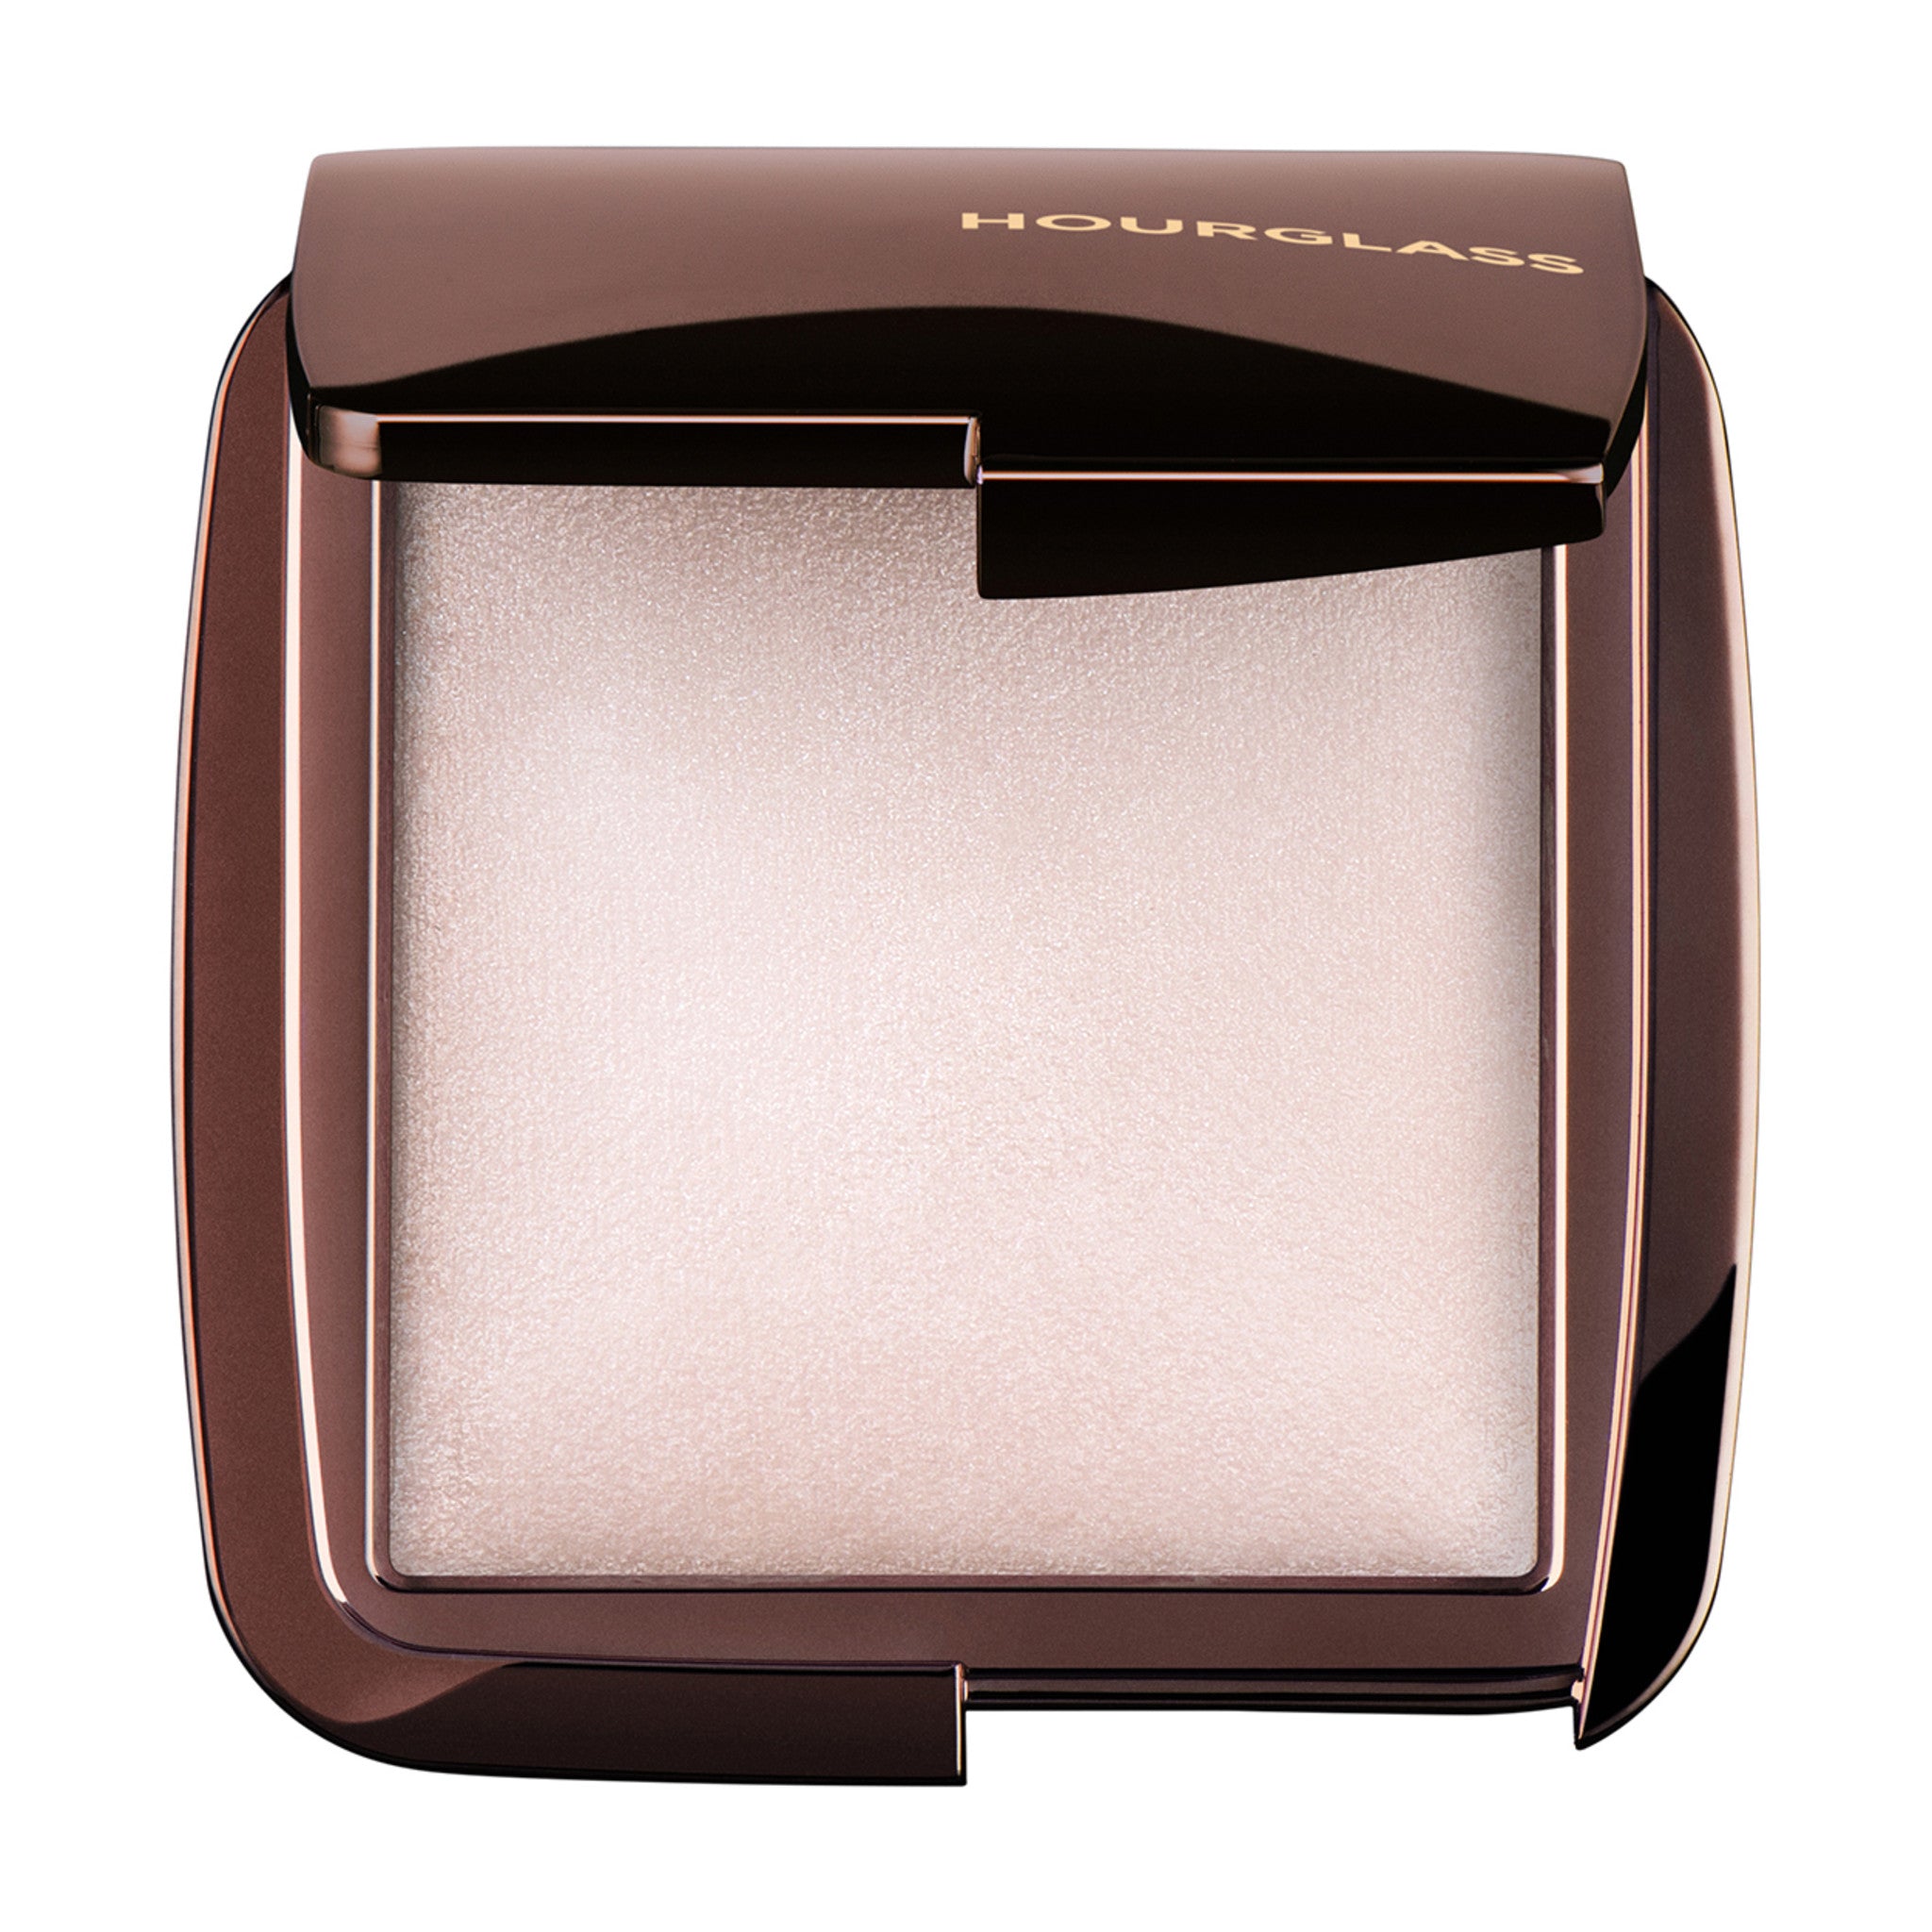 Hourglass Ambient Lighting Powder Color/Shade variant: Ethereal Light main image. This product is for medium complexions